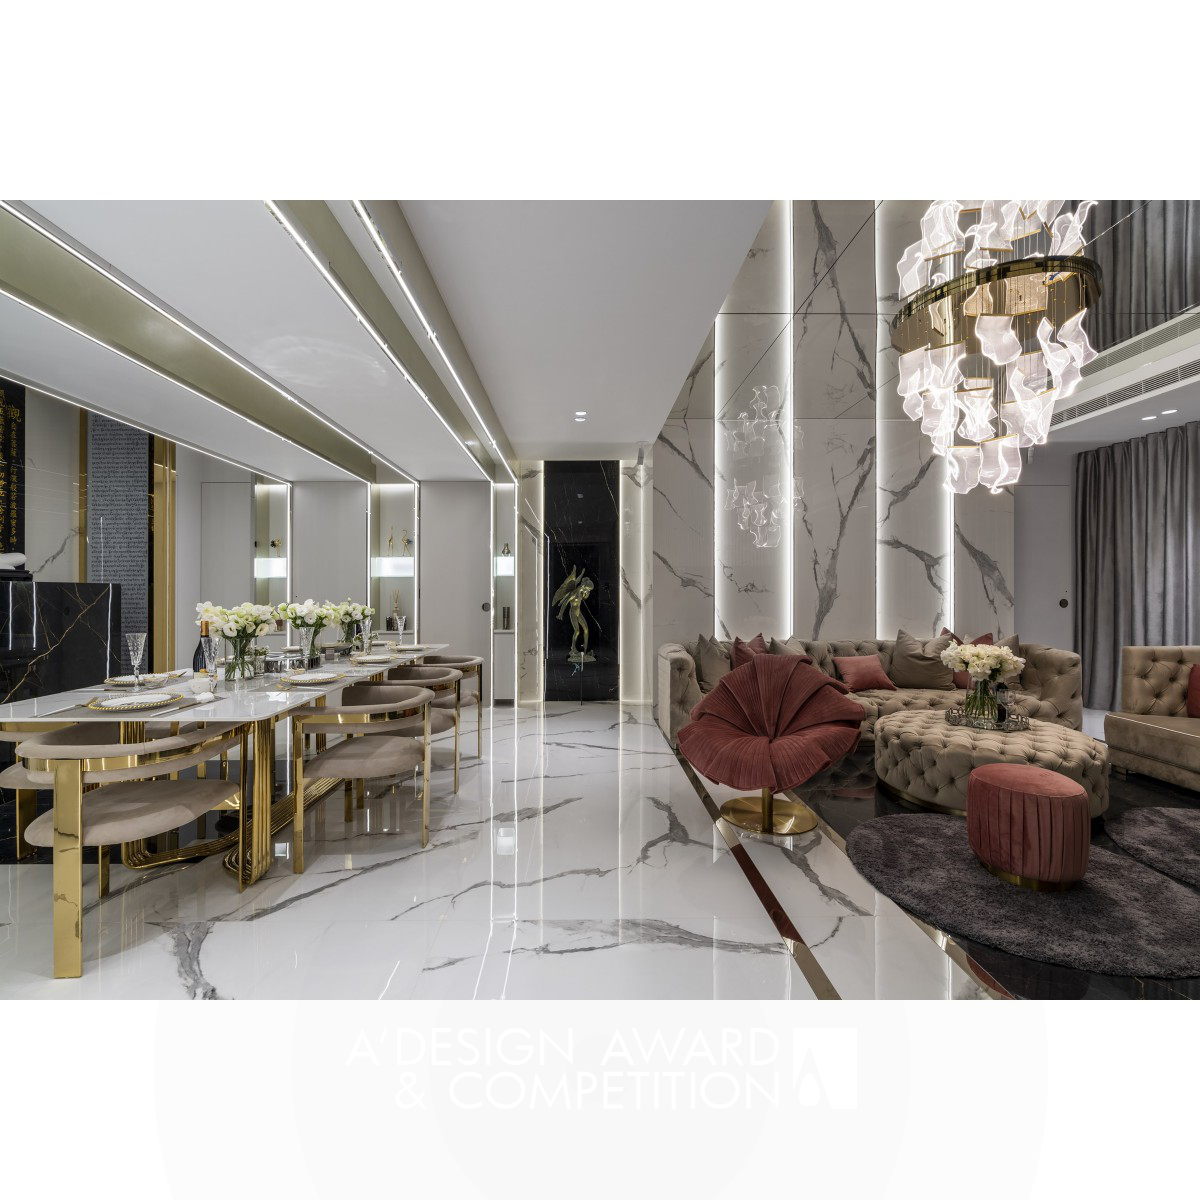 Montage Fantasia Residential  by Lo Fang Ming